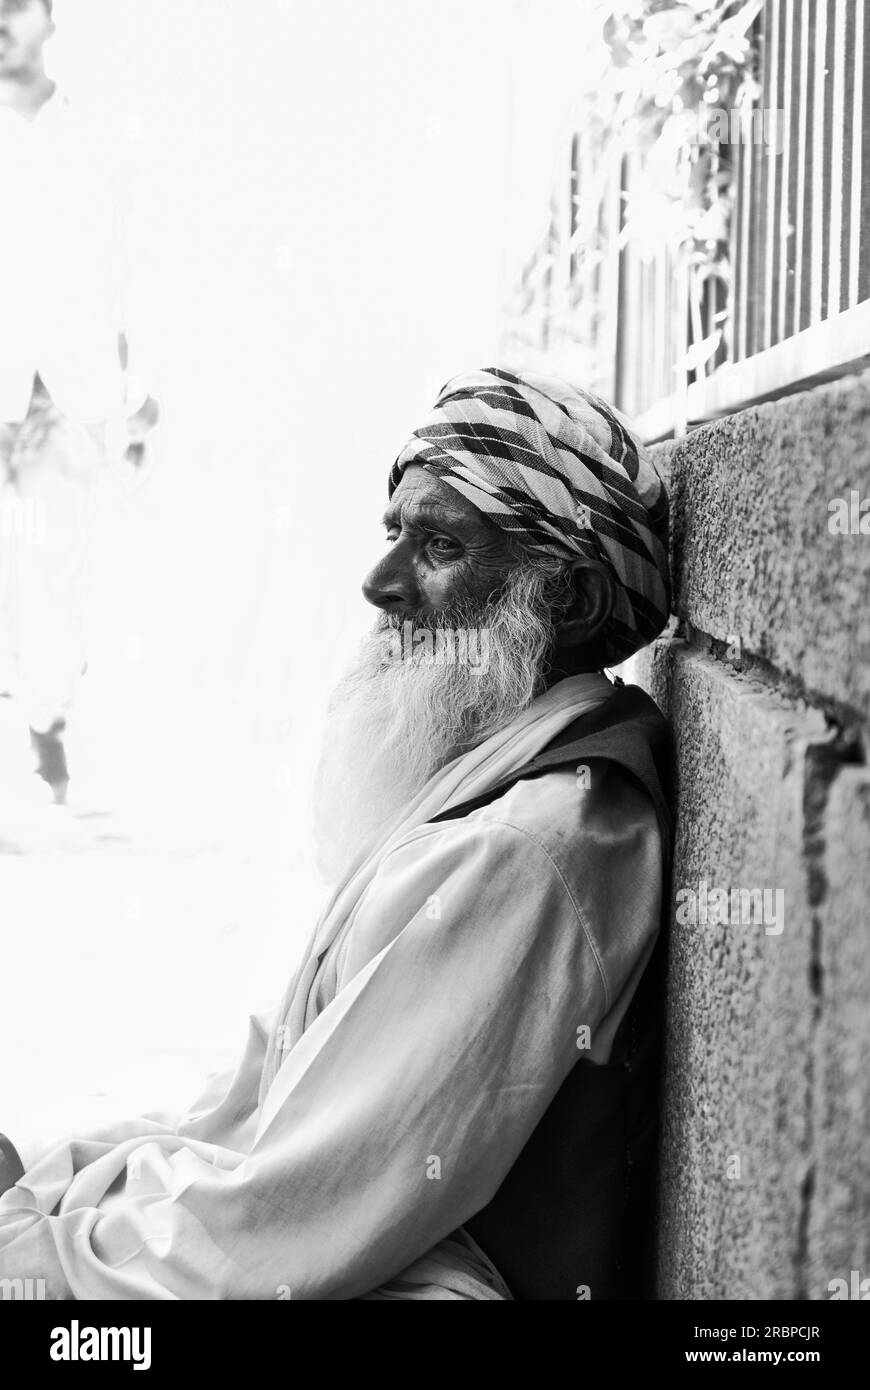 Portrait of an old indian man Stock Photo